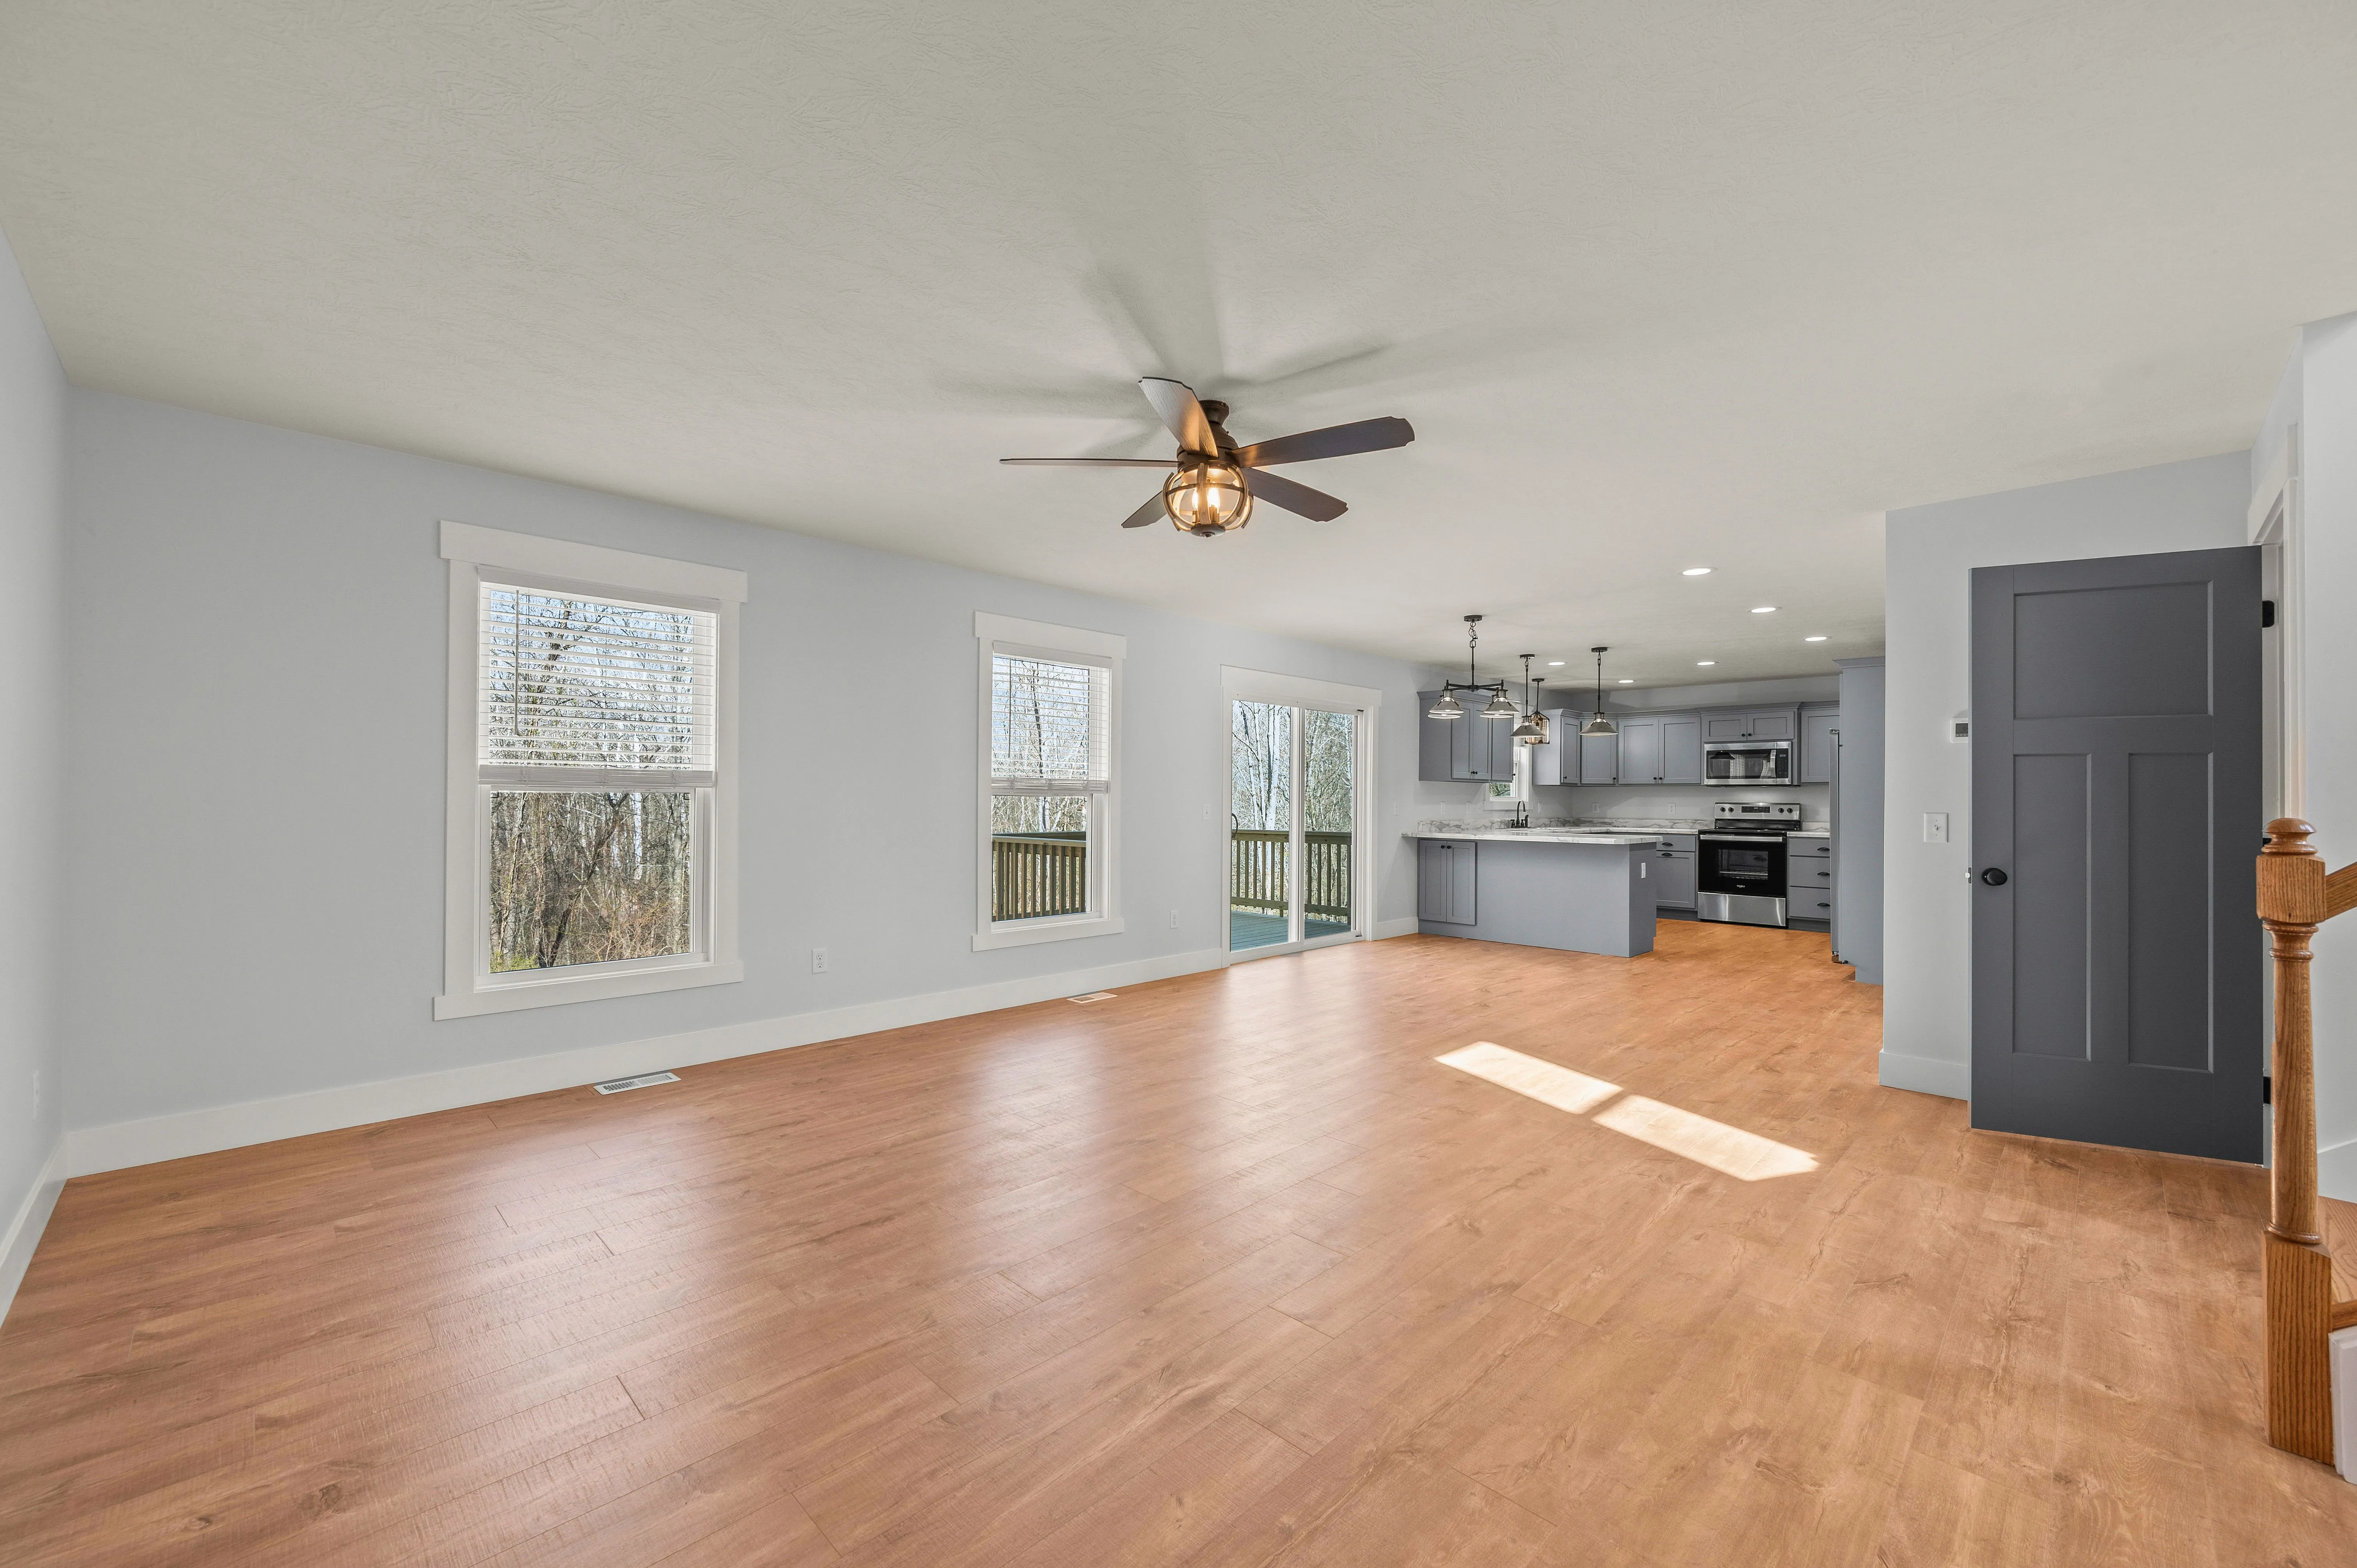 Spacious empty room with hardwood floors, pale blue walls, ceiling fan, and an open kitchen with modern appliances in the background.